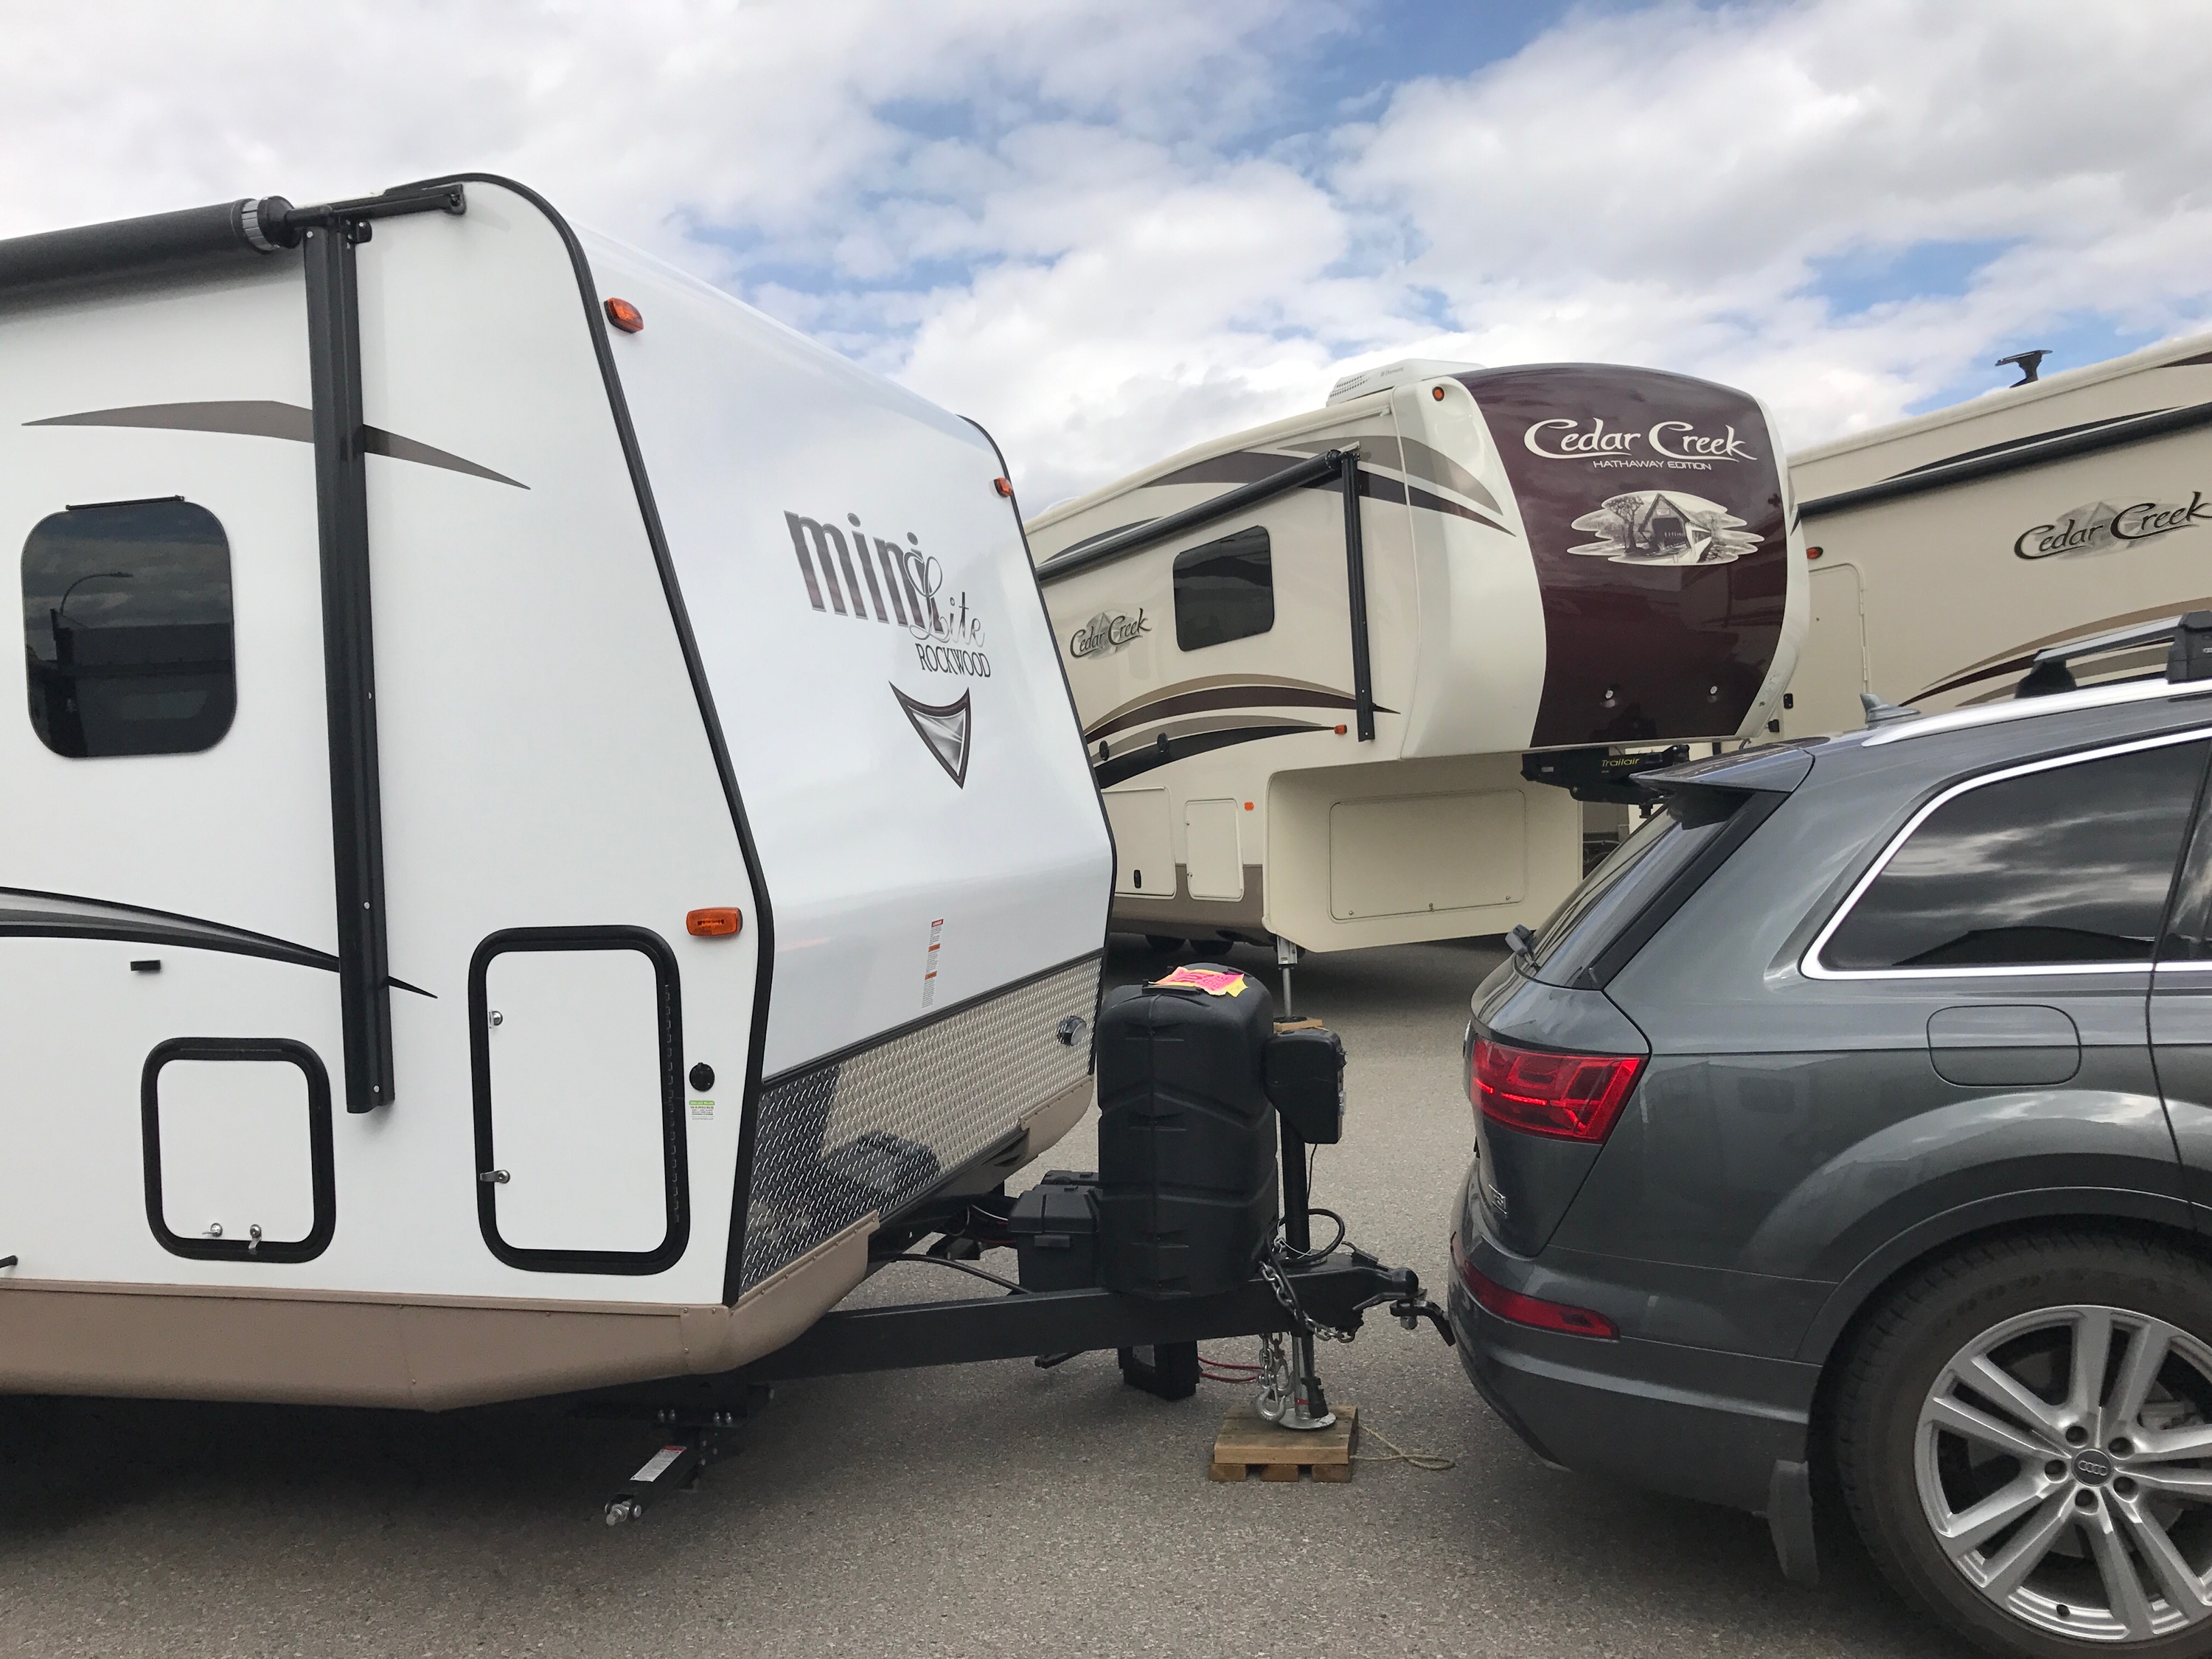 What Is The Towing Capacity of the Audi Q7?